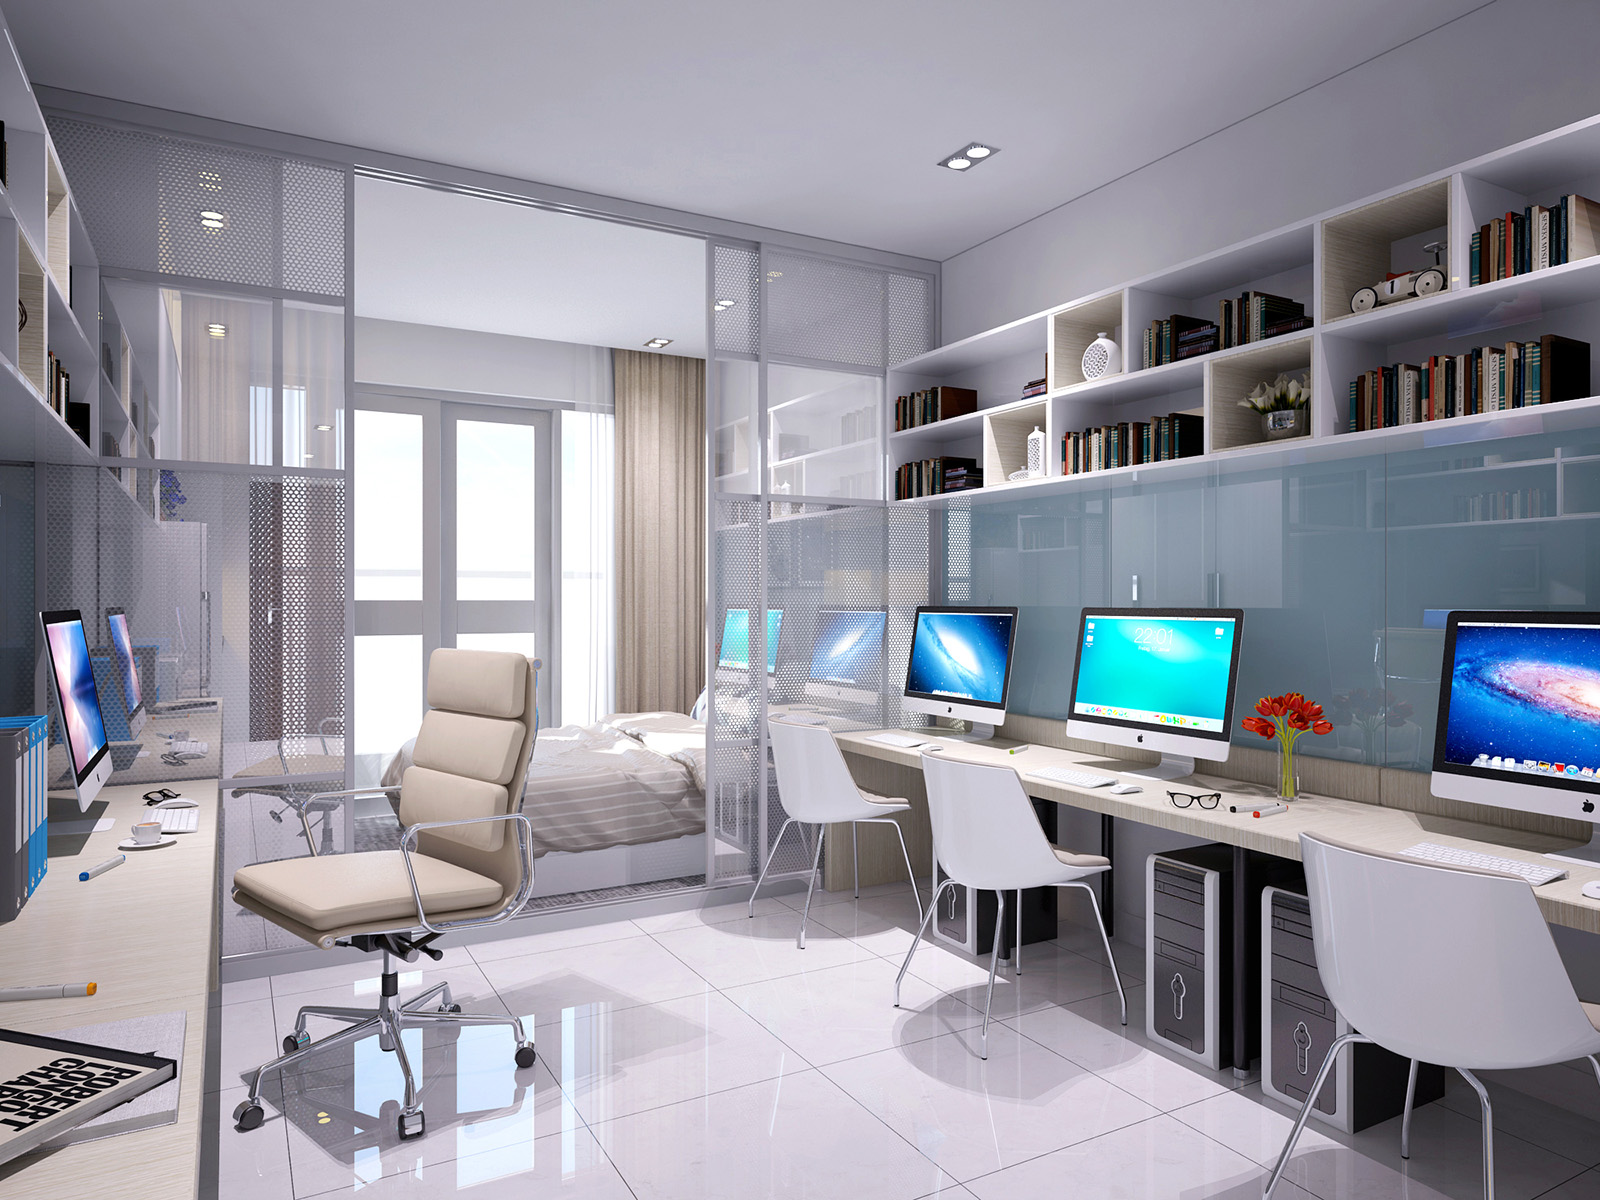 An artist’s impression of the interior of an officetel unit. (Photo: TL)